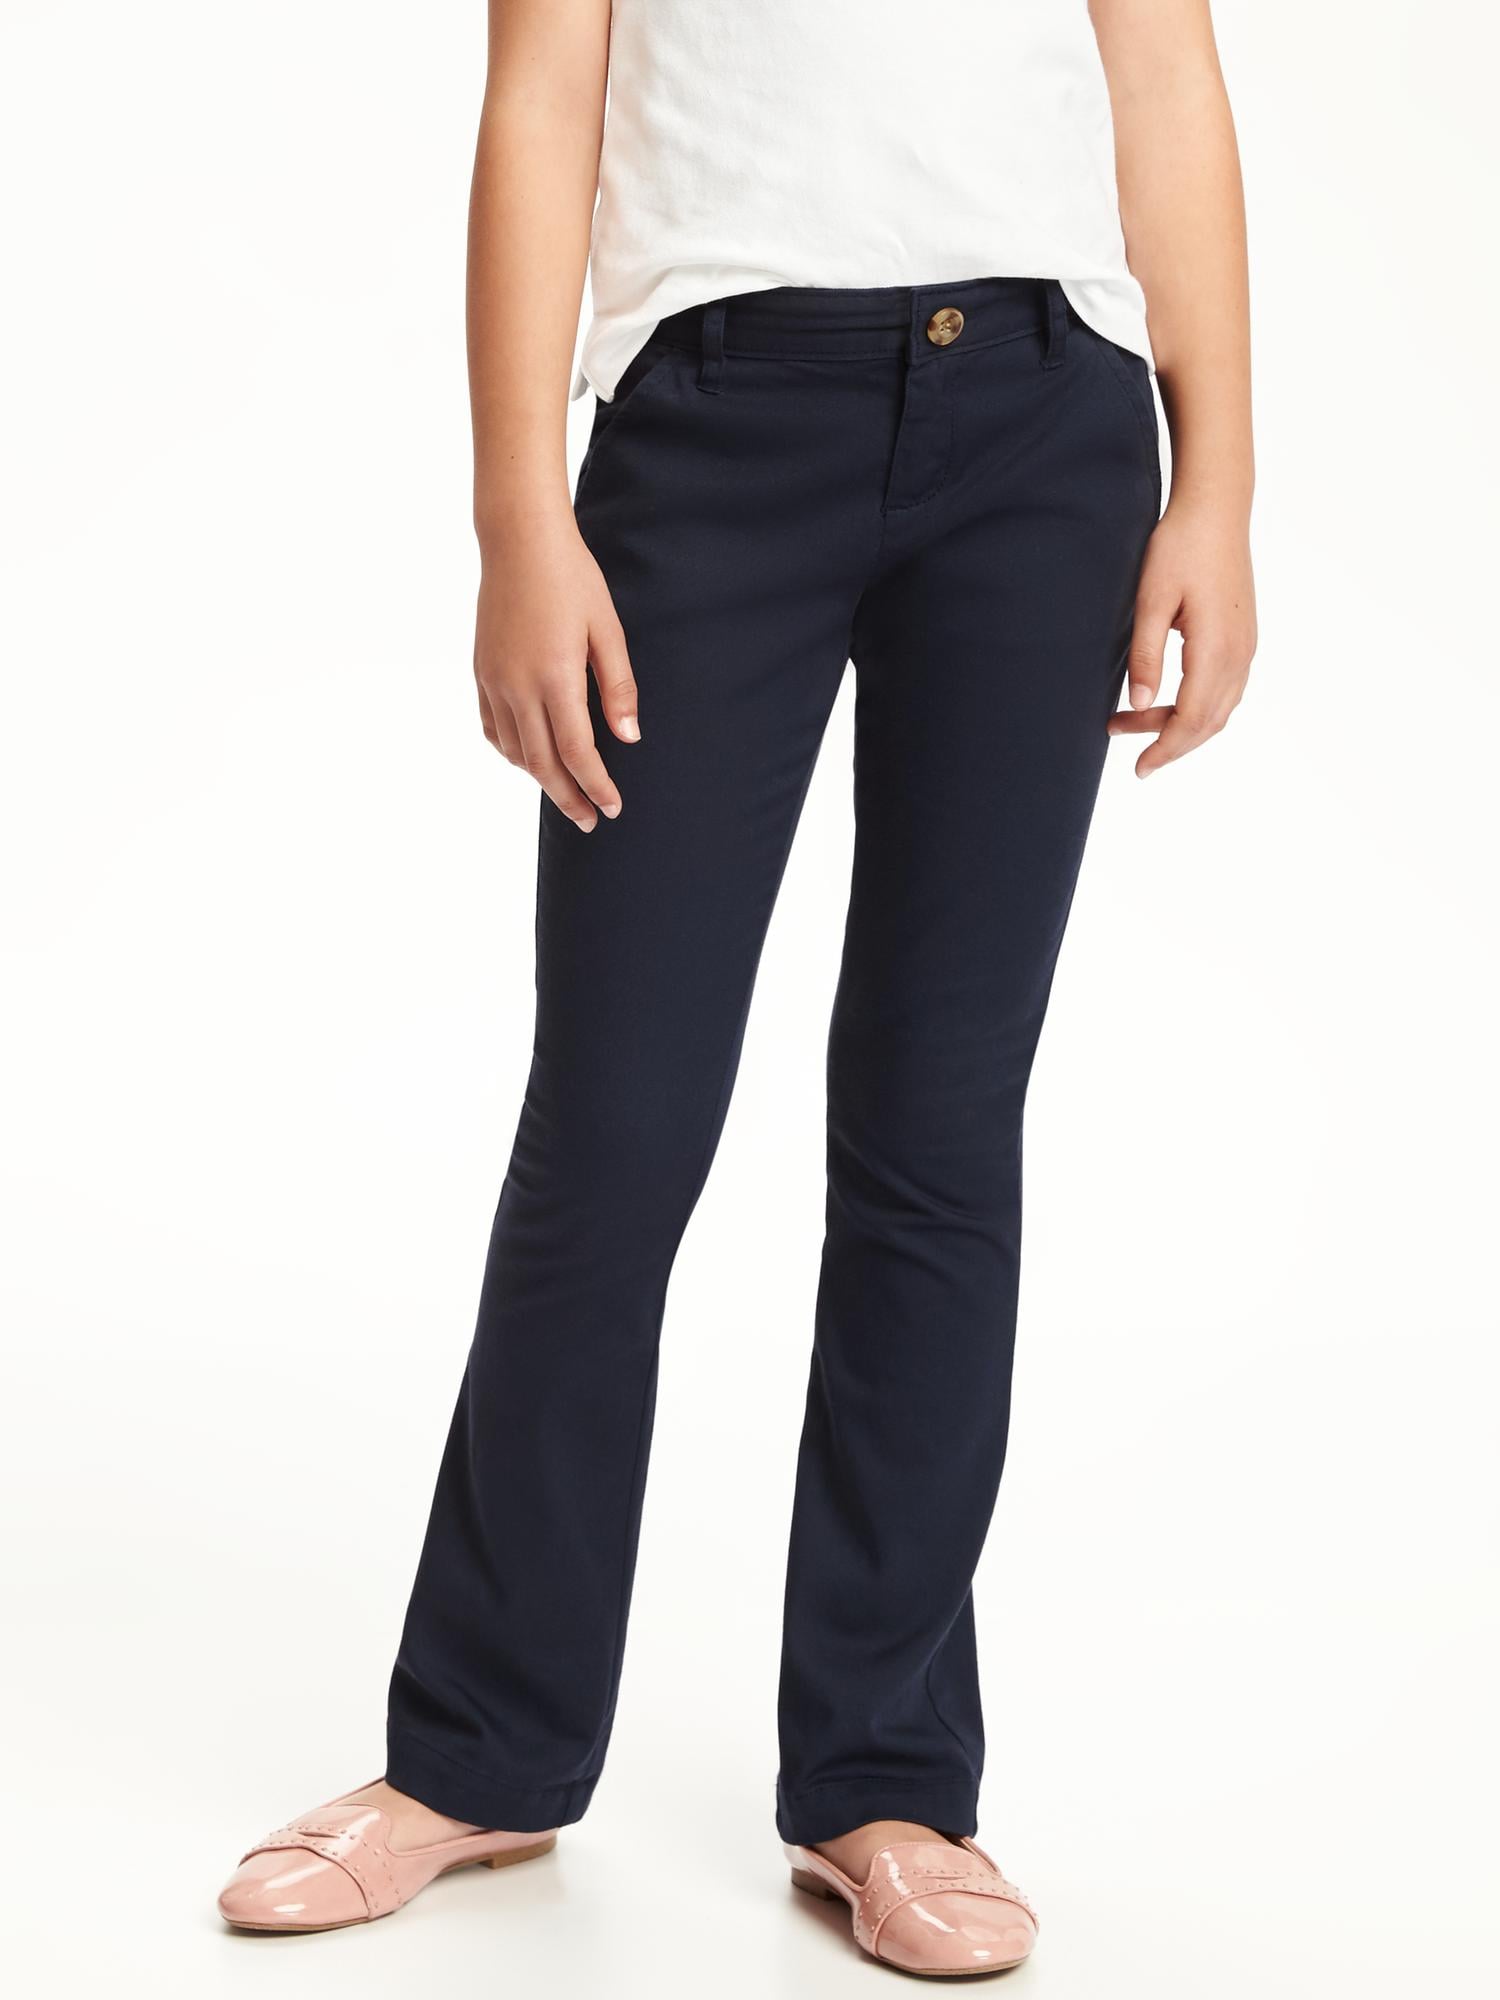 *Today Only Deal* Uniform Bootcut Pants for Girls